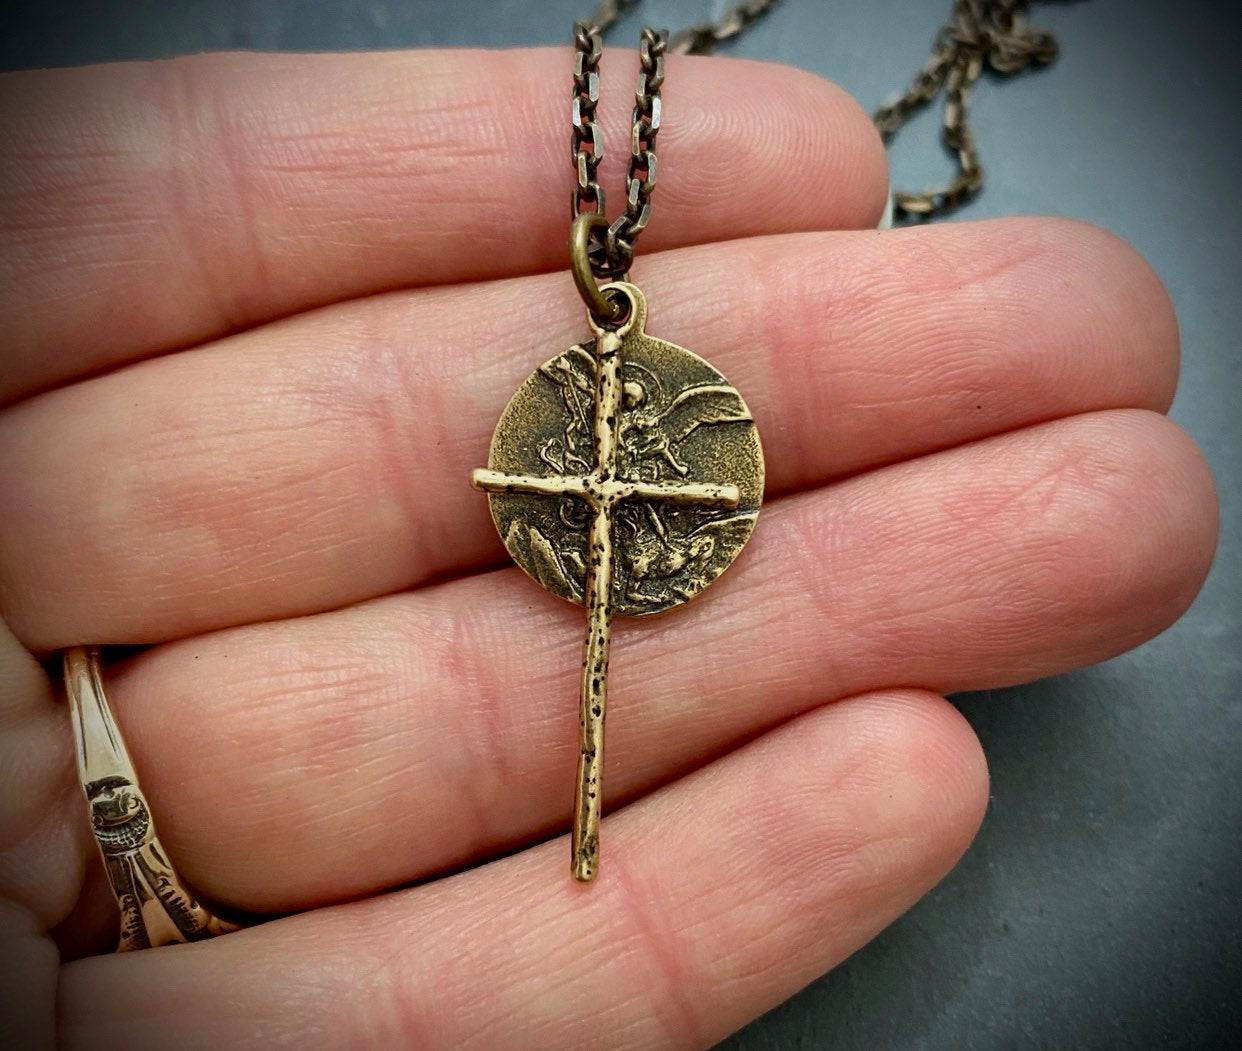 Men's Necklace, Archangel St. Michael Vintage Style Catholic Medal with Cross, Antiqued Brass Unisex Jewelry, 20 or 24 Inch Chain, BR-034